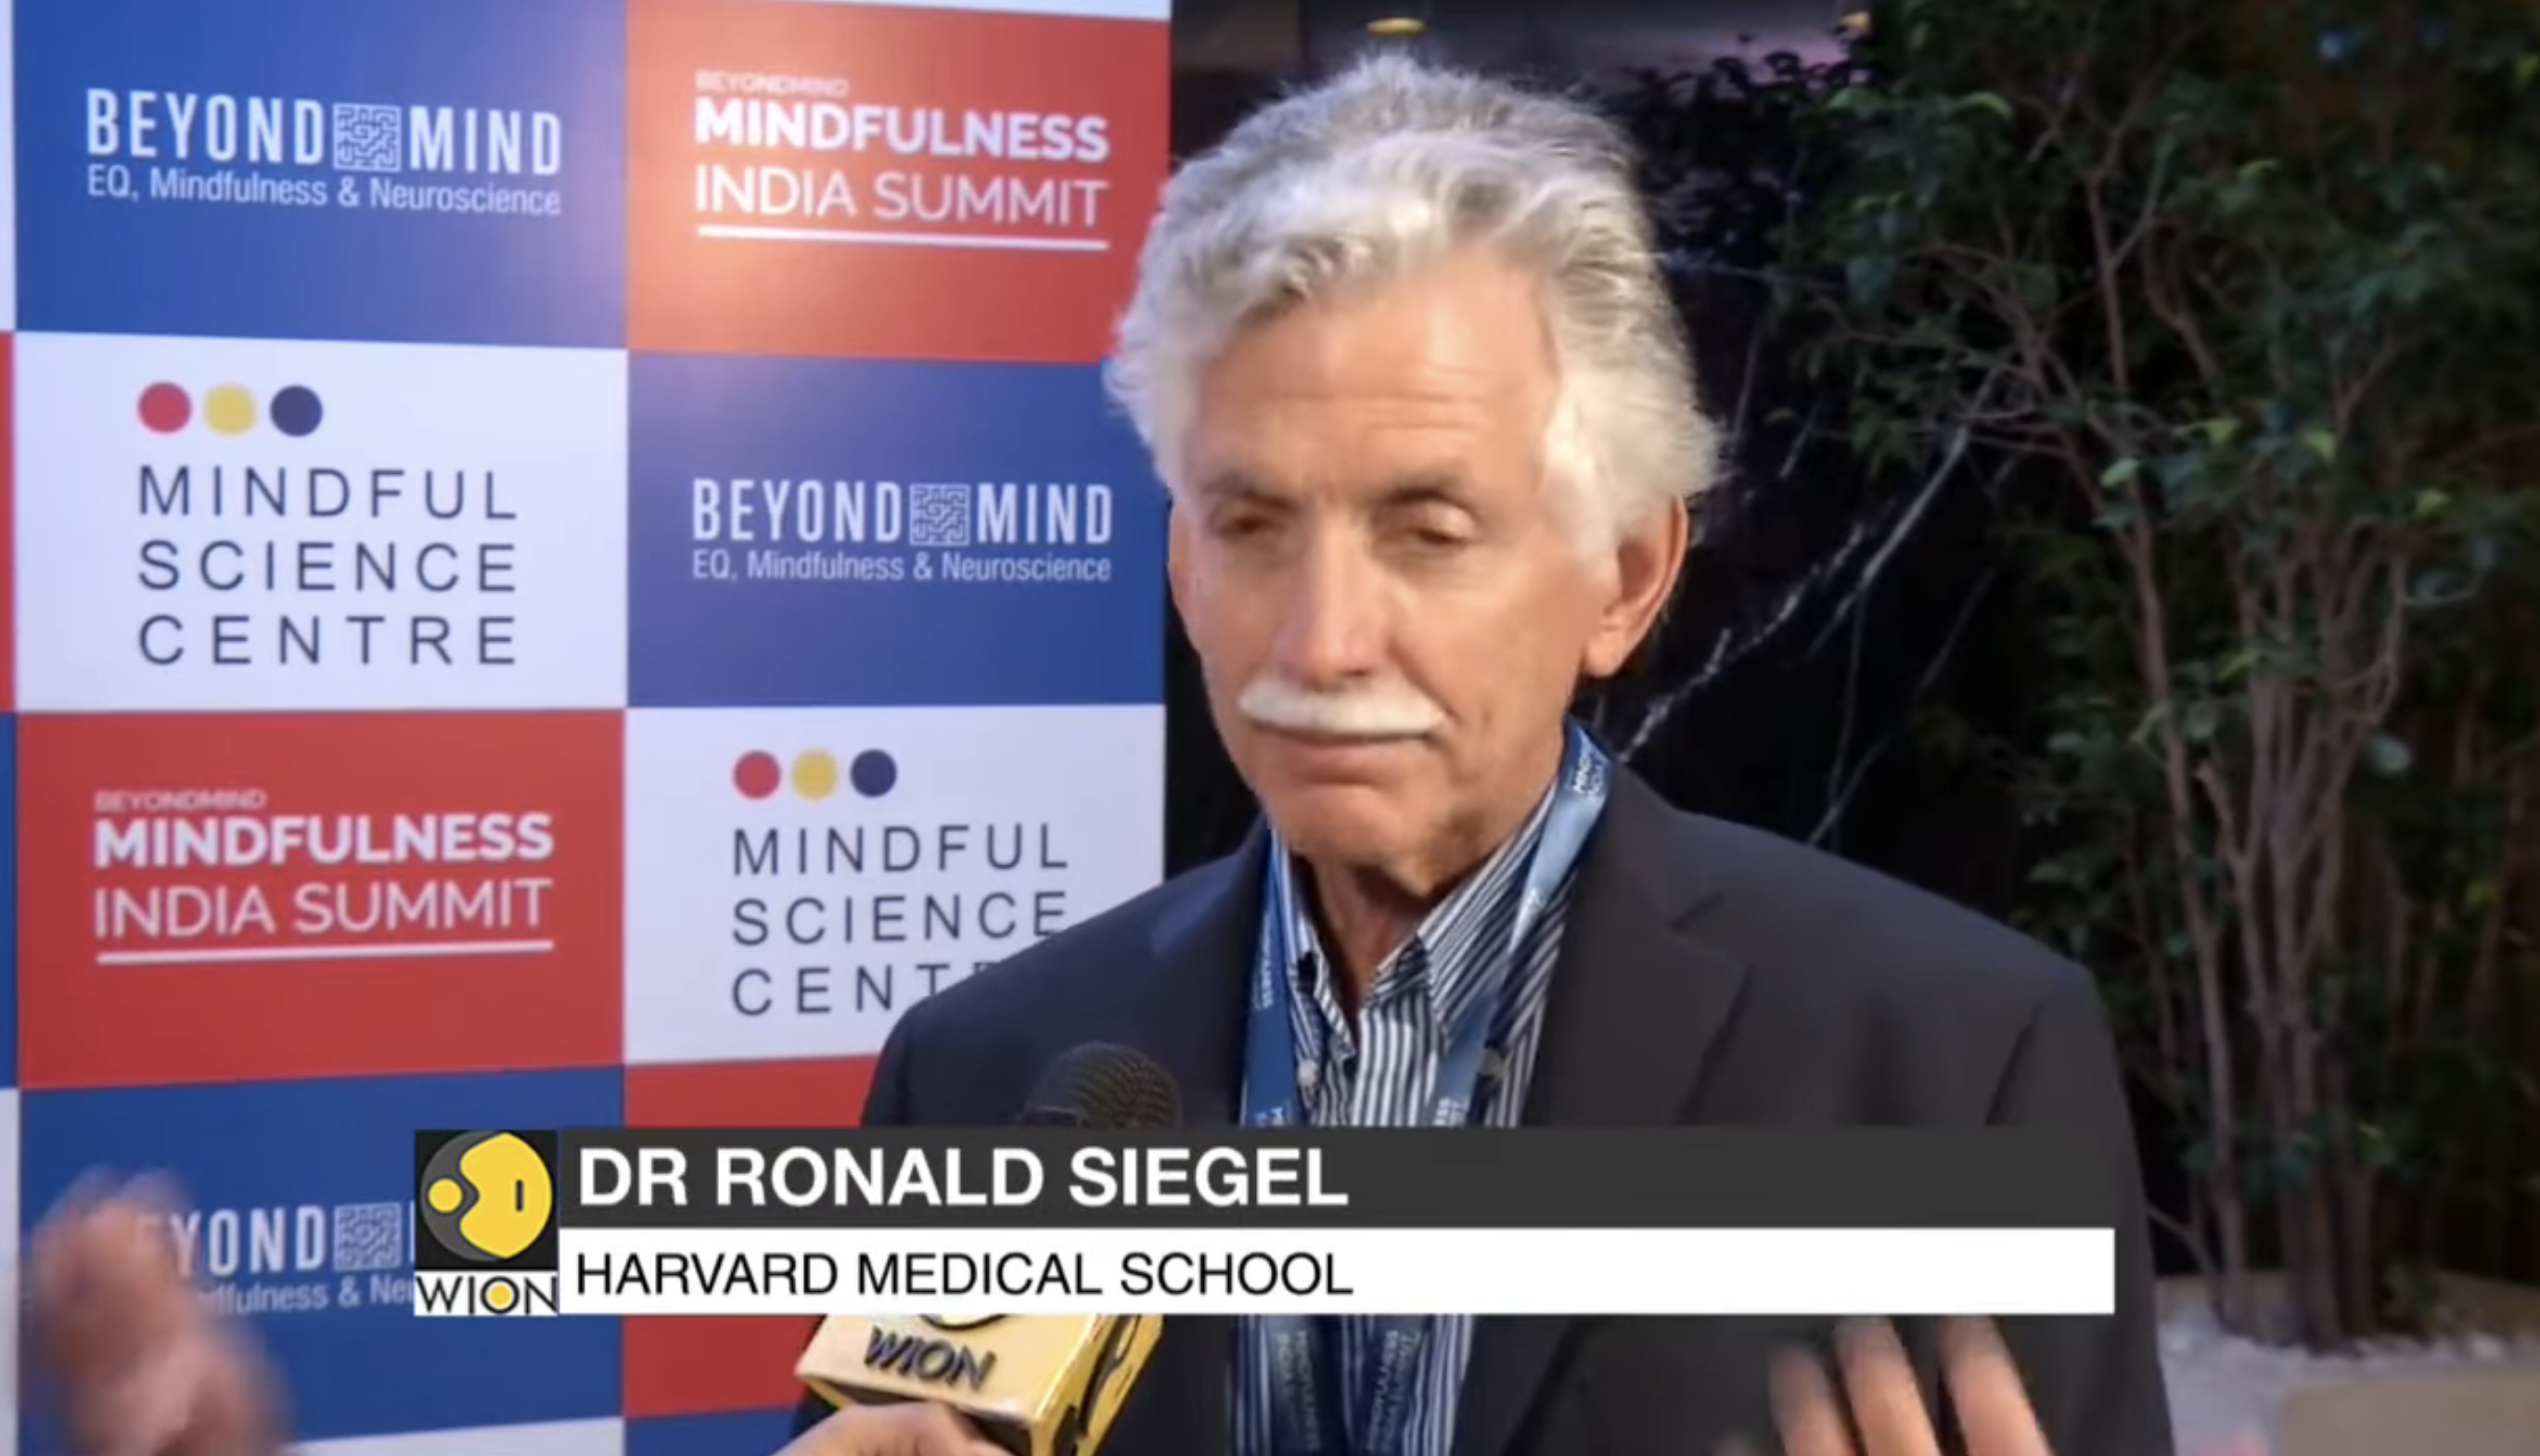 Harvard Medical School, Oxford Mindfulness Centre Part of Asia’s largest Annual Mindfulness Summit in Mumbai – 2019